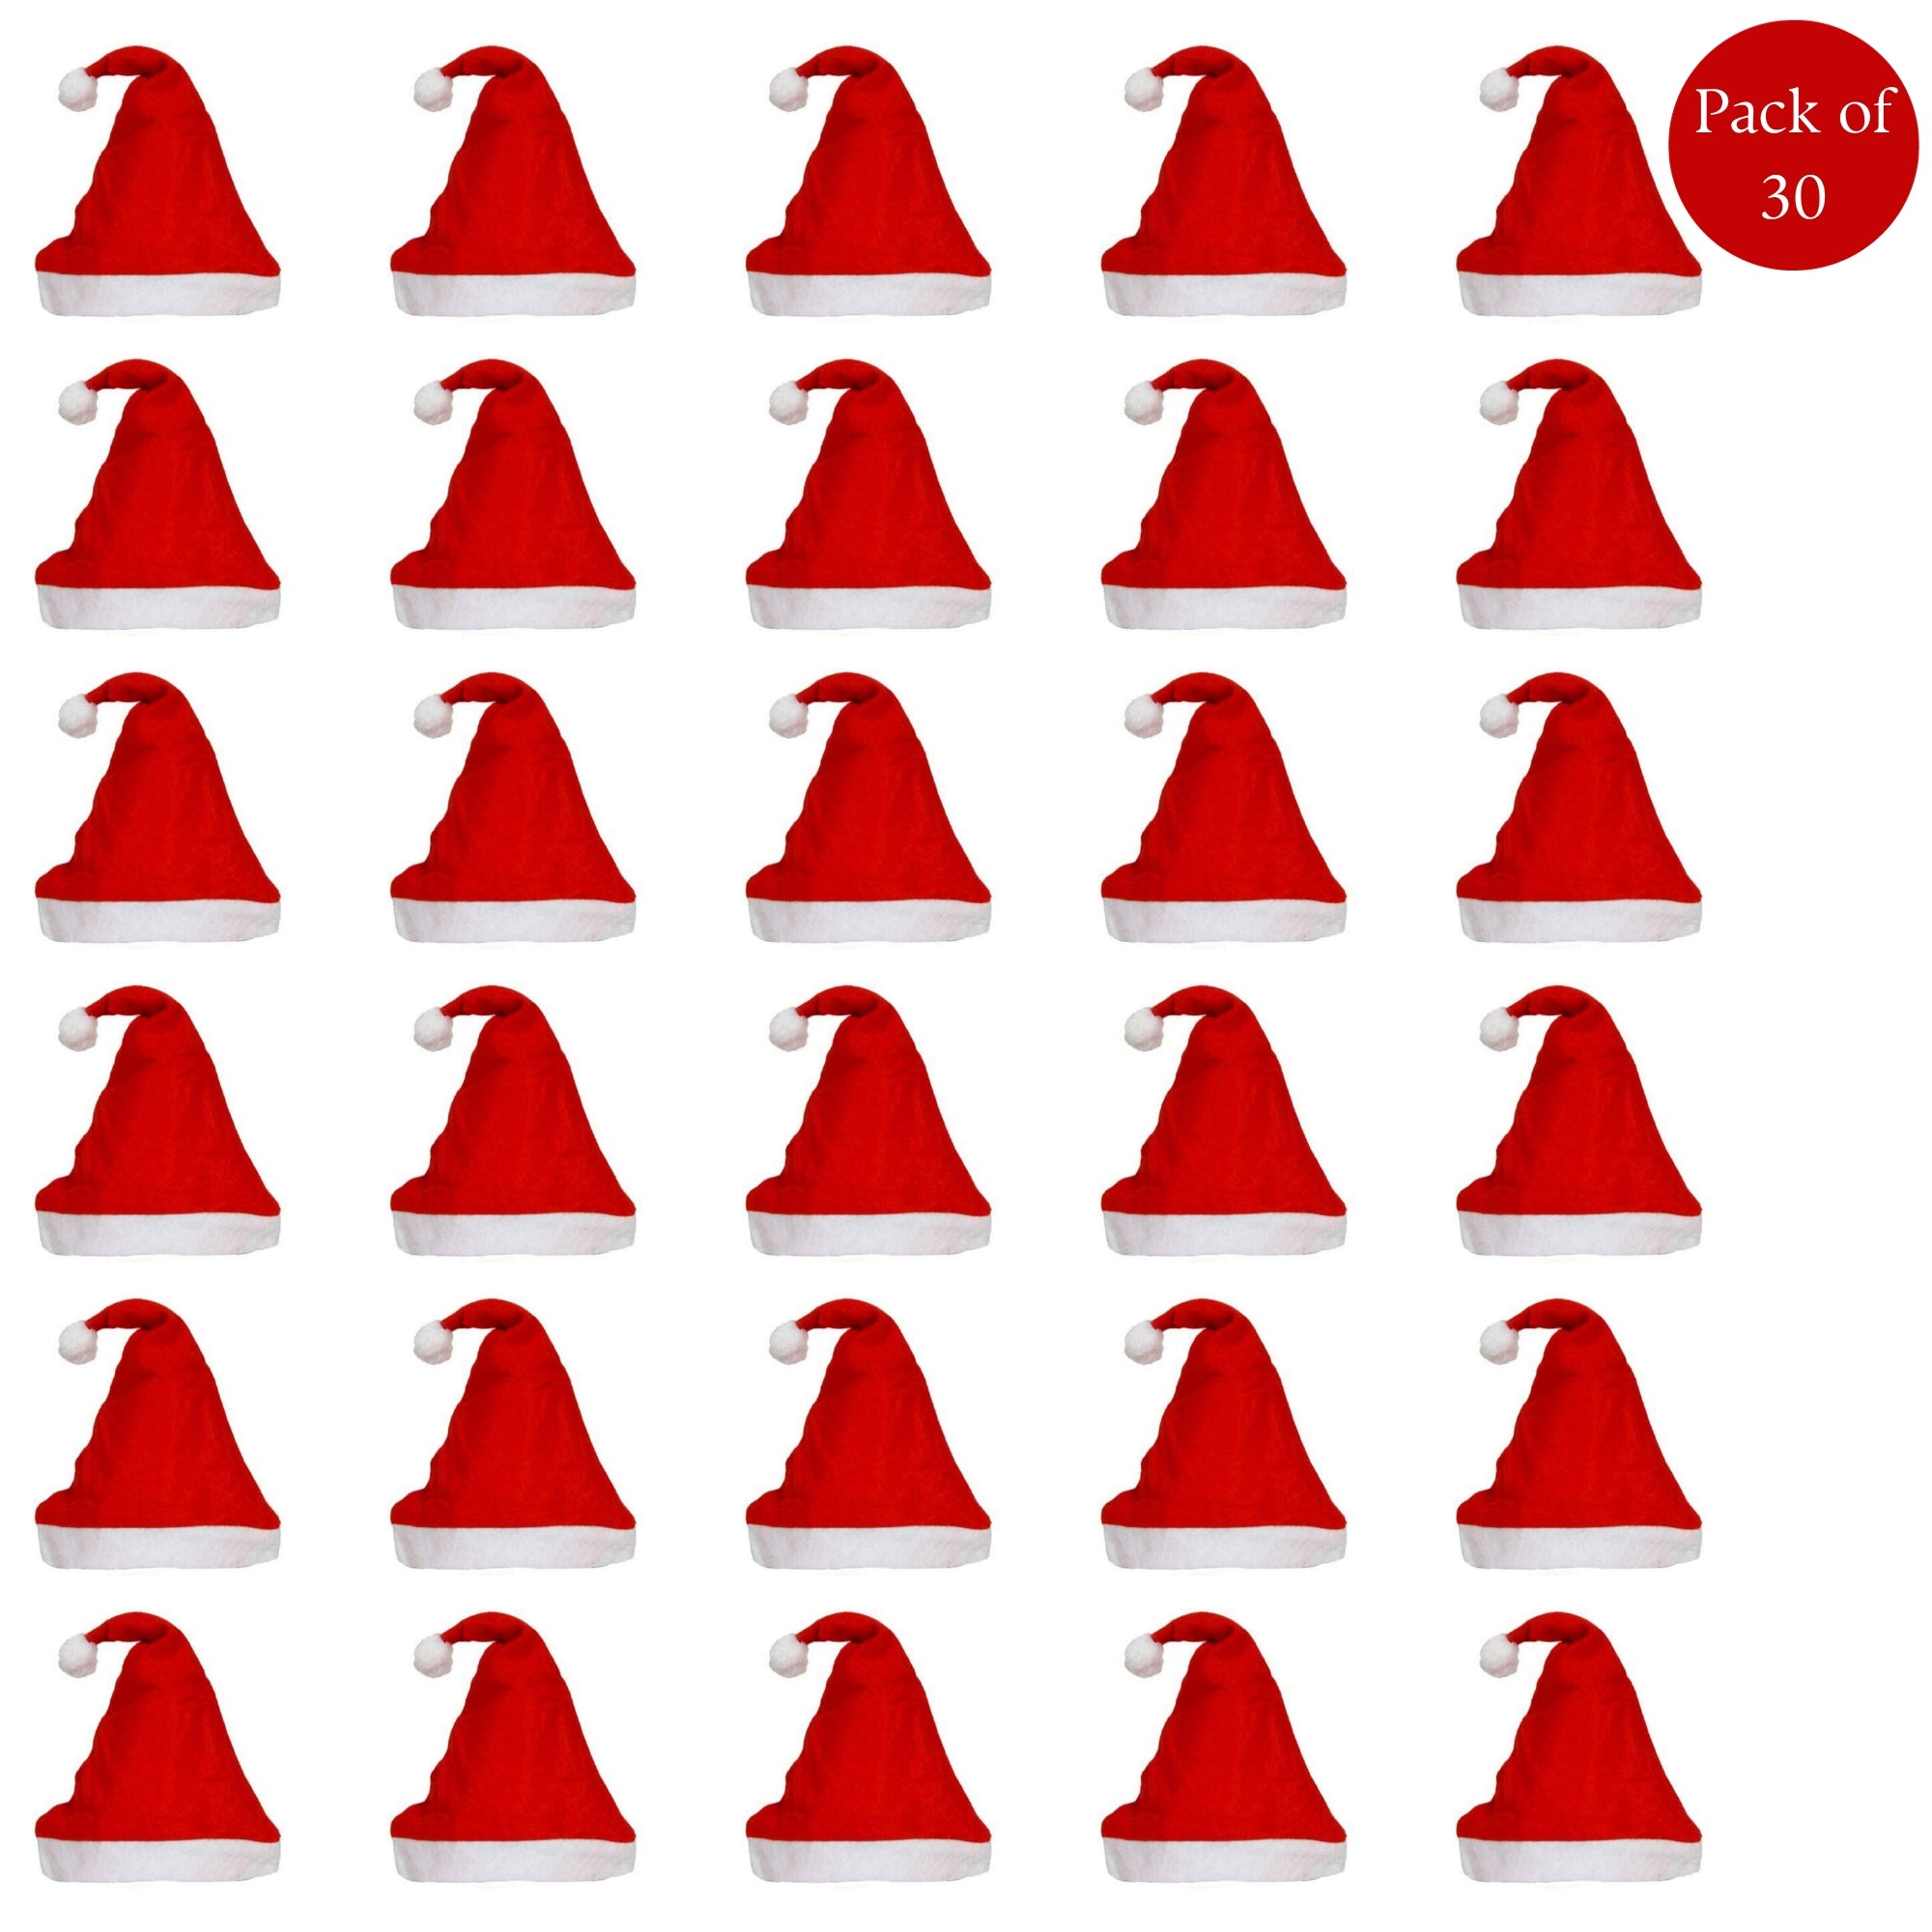 eCraftIndia Red and White Merry Christmas Hats, Santa Claus Caps for kids and Adults - Free Size XMAS Caps, Santa Claus Hats for Christmas, New Year, Festive Holiday Party (Set of 30) 1